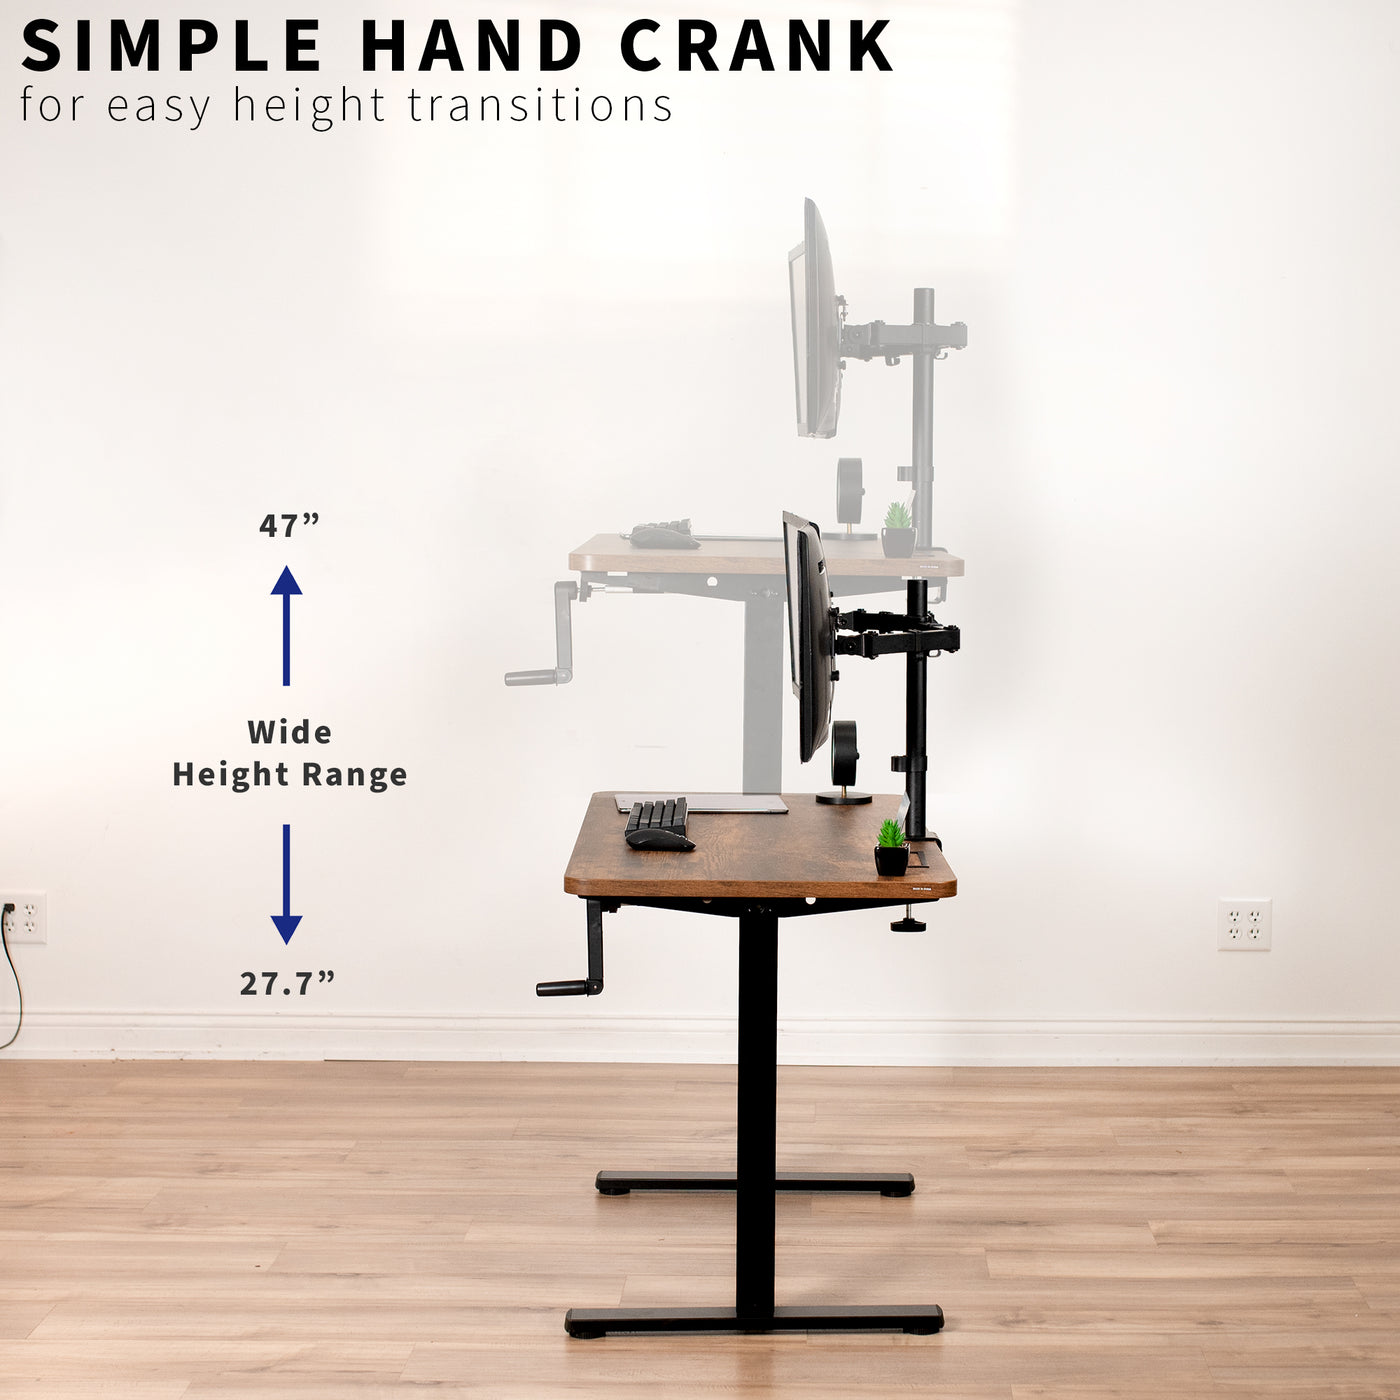  A wide height range is provided along the side of the desk with a simple hand crank.